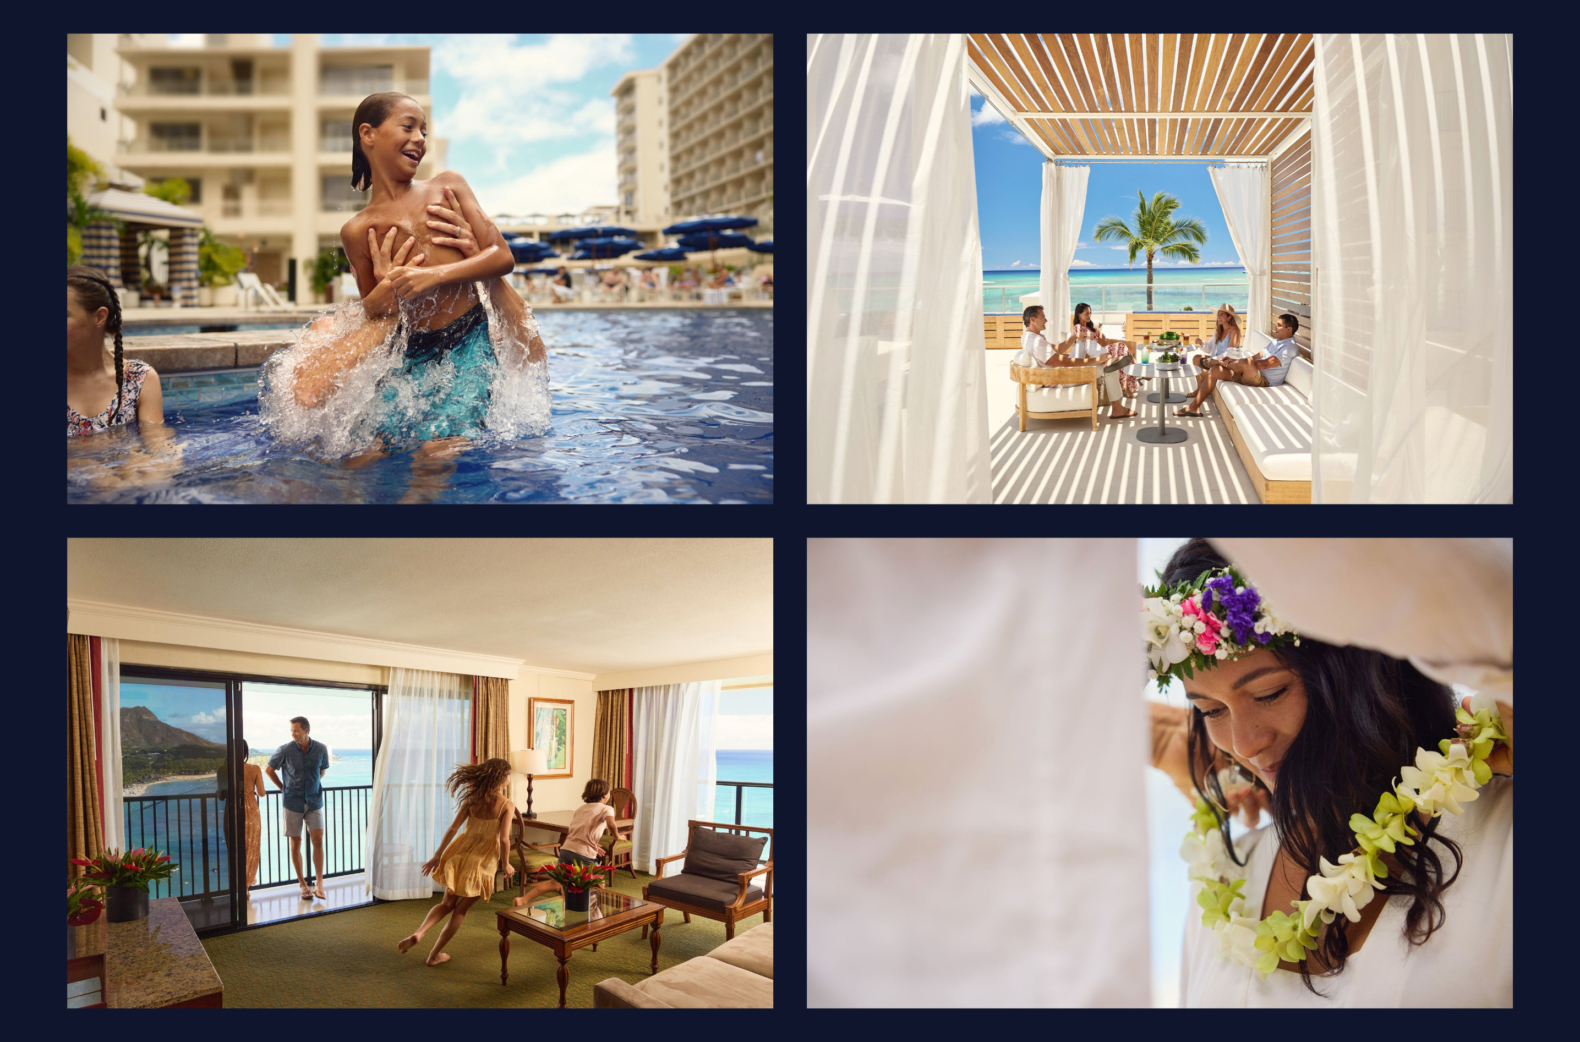 Four photos in a grid - top left is a laughing young boy wearing bright blue swim trunks being lifted out of the pool water by his father, the top right shows two adult couples lounging at a hotel beach cabana in the shade of the light wooden trellis, sheer white ___ frame the image and a bright blue sea with a green palm tree fill the background. The bottom left image shows a family in a corner hotel room on the ocean, the kids run through the sitting area while the parents lean against the outdoor balcony rail, you can see the Hawaiian coast in the background. The bottom right image shows a close up photo of a brunette woman receiving a wedding lei while bowing her head and smiling, she is wearing a wreath of leis in white, hot pink and purple on her head. 